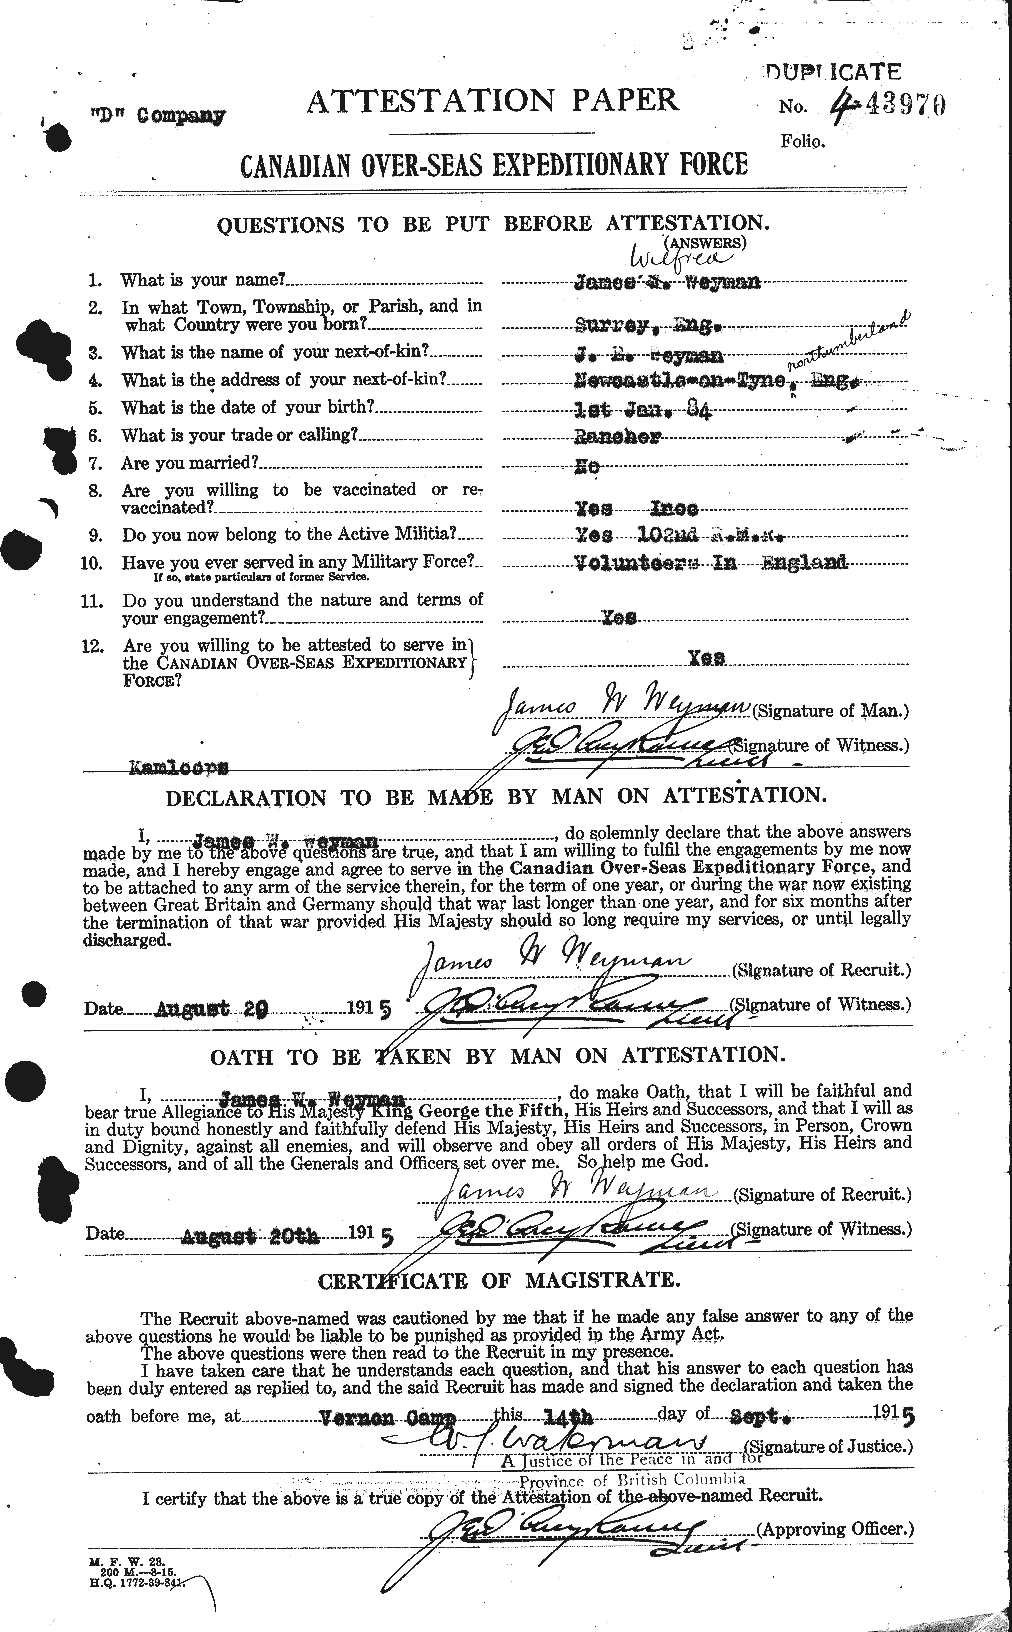 Personnel Records of the First World War - CEF 666820a